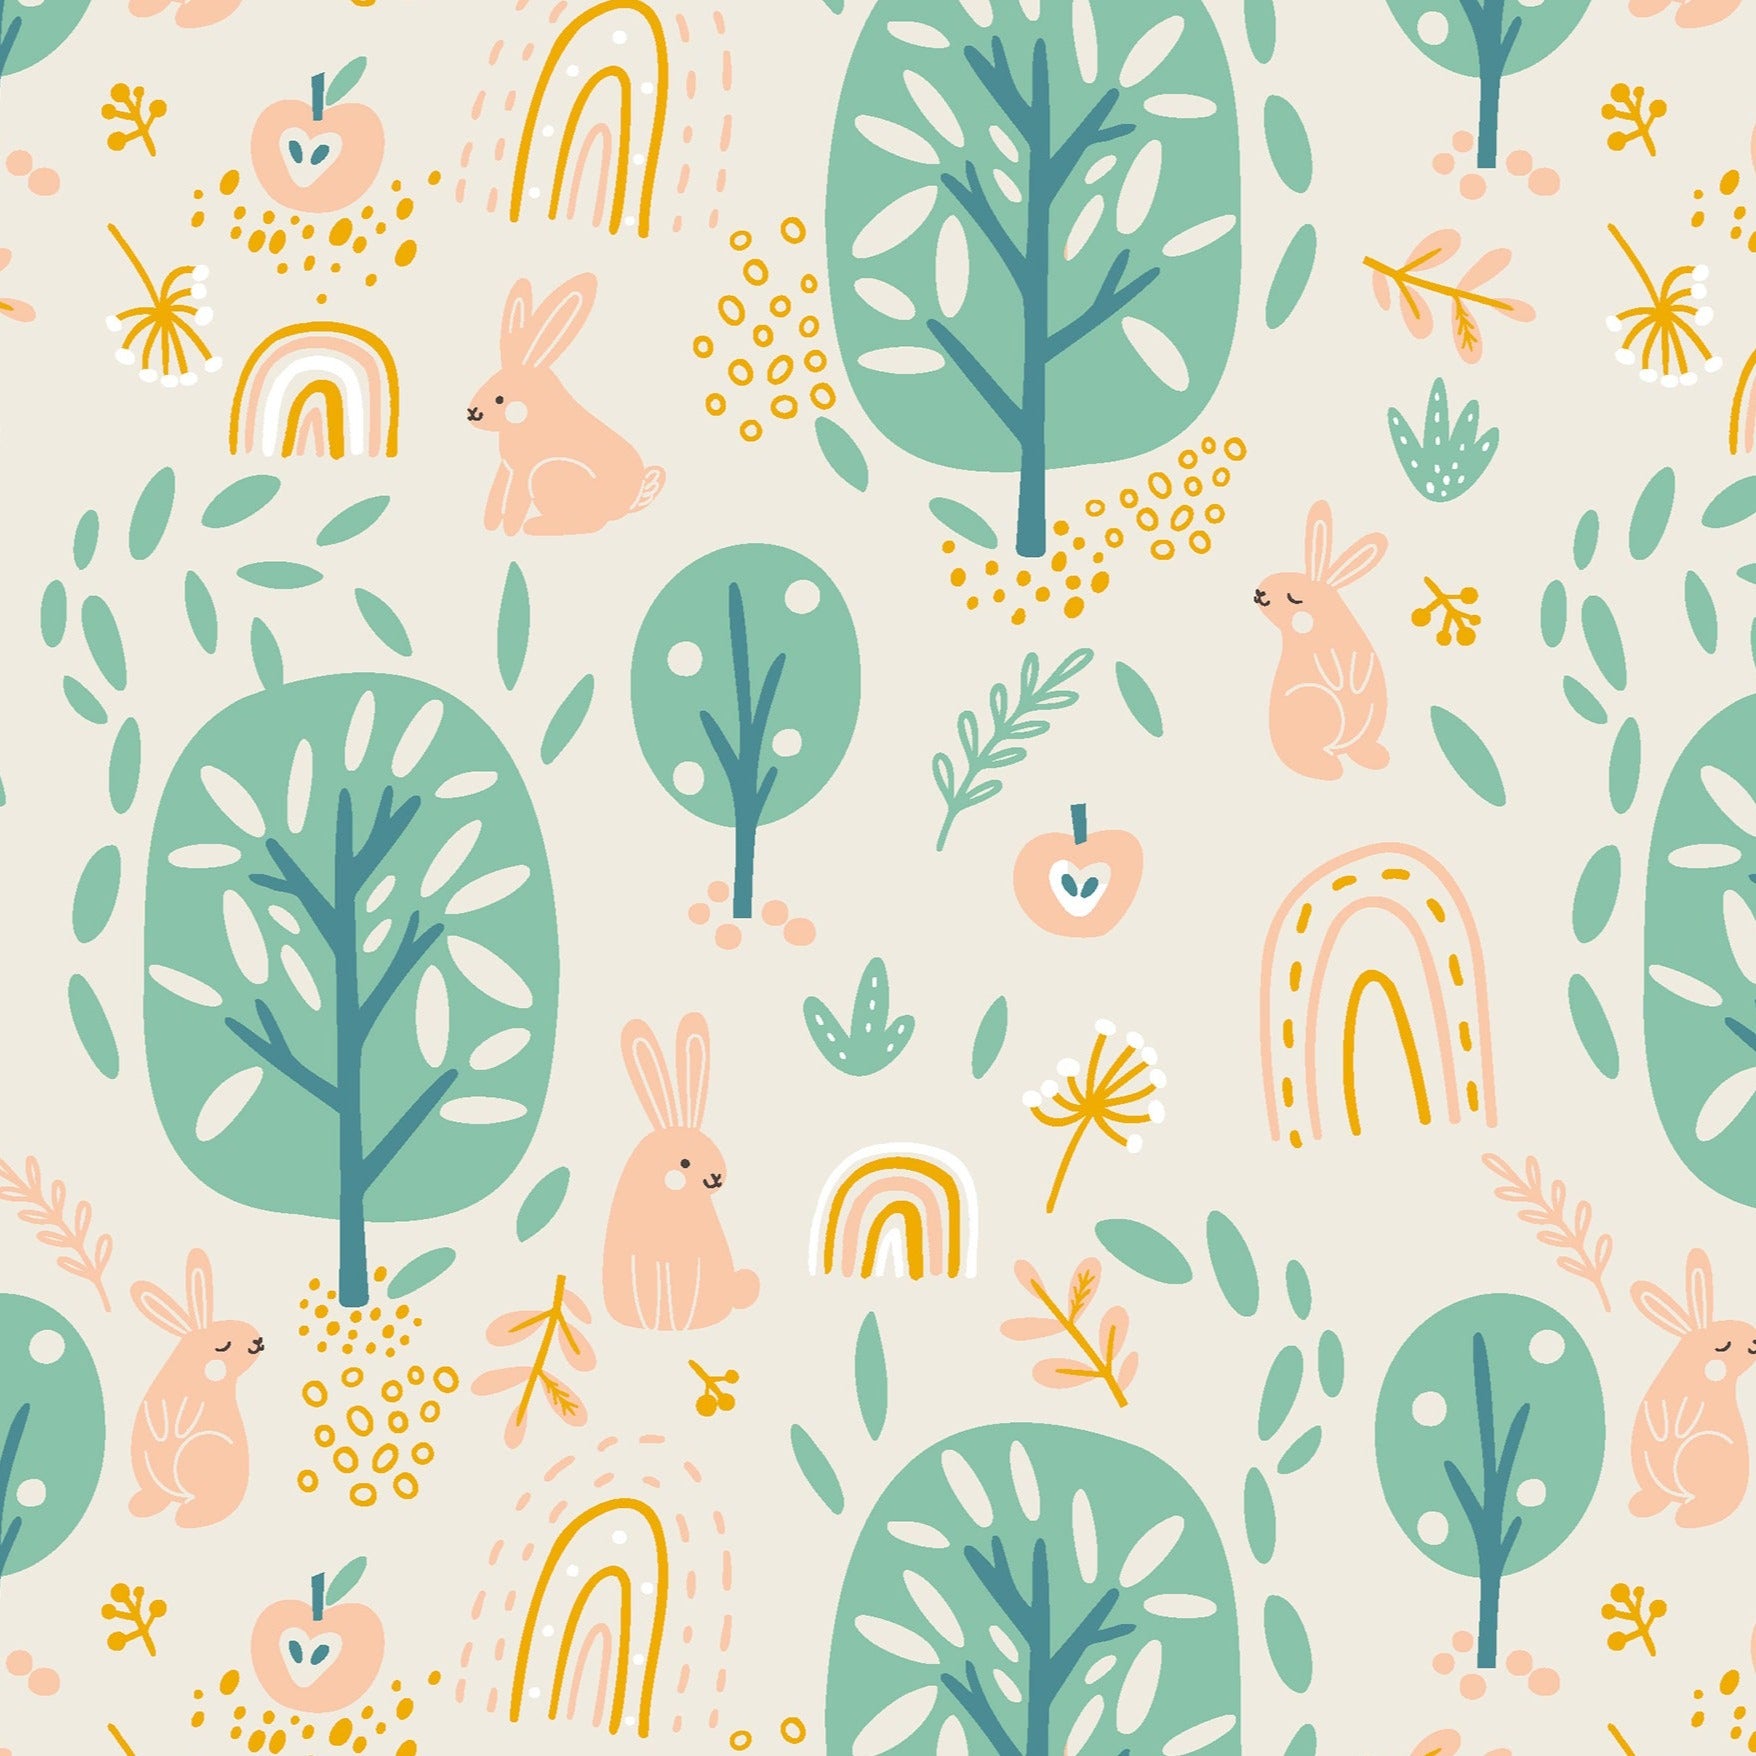 Seamless pattern of playful rabbits, trees, and small rainbows on a pale peach background, interspersed with flowers and leaves, ideal for a serene and engaging children's room decor.